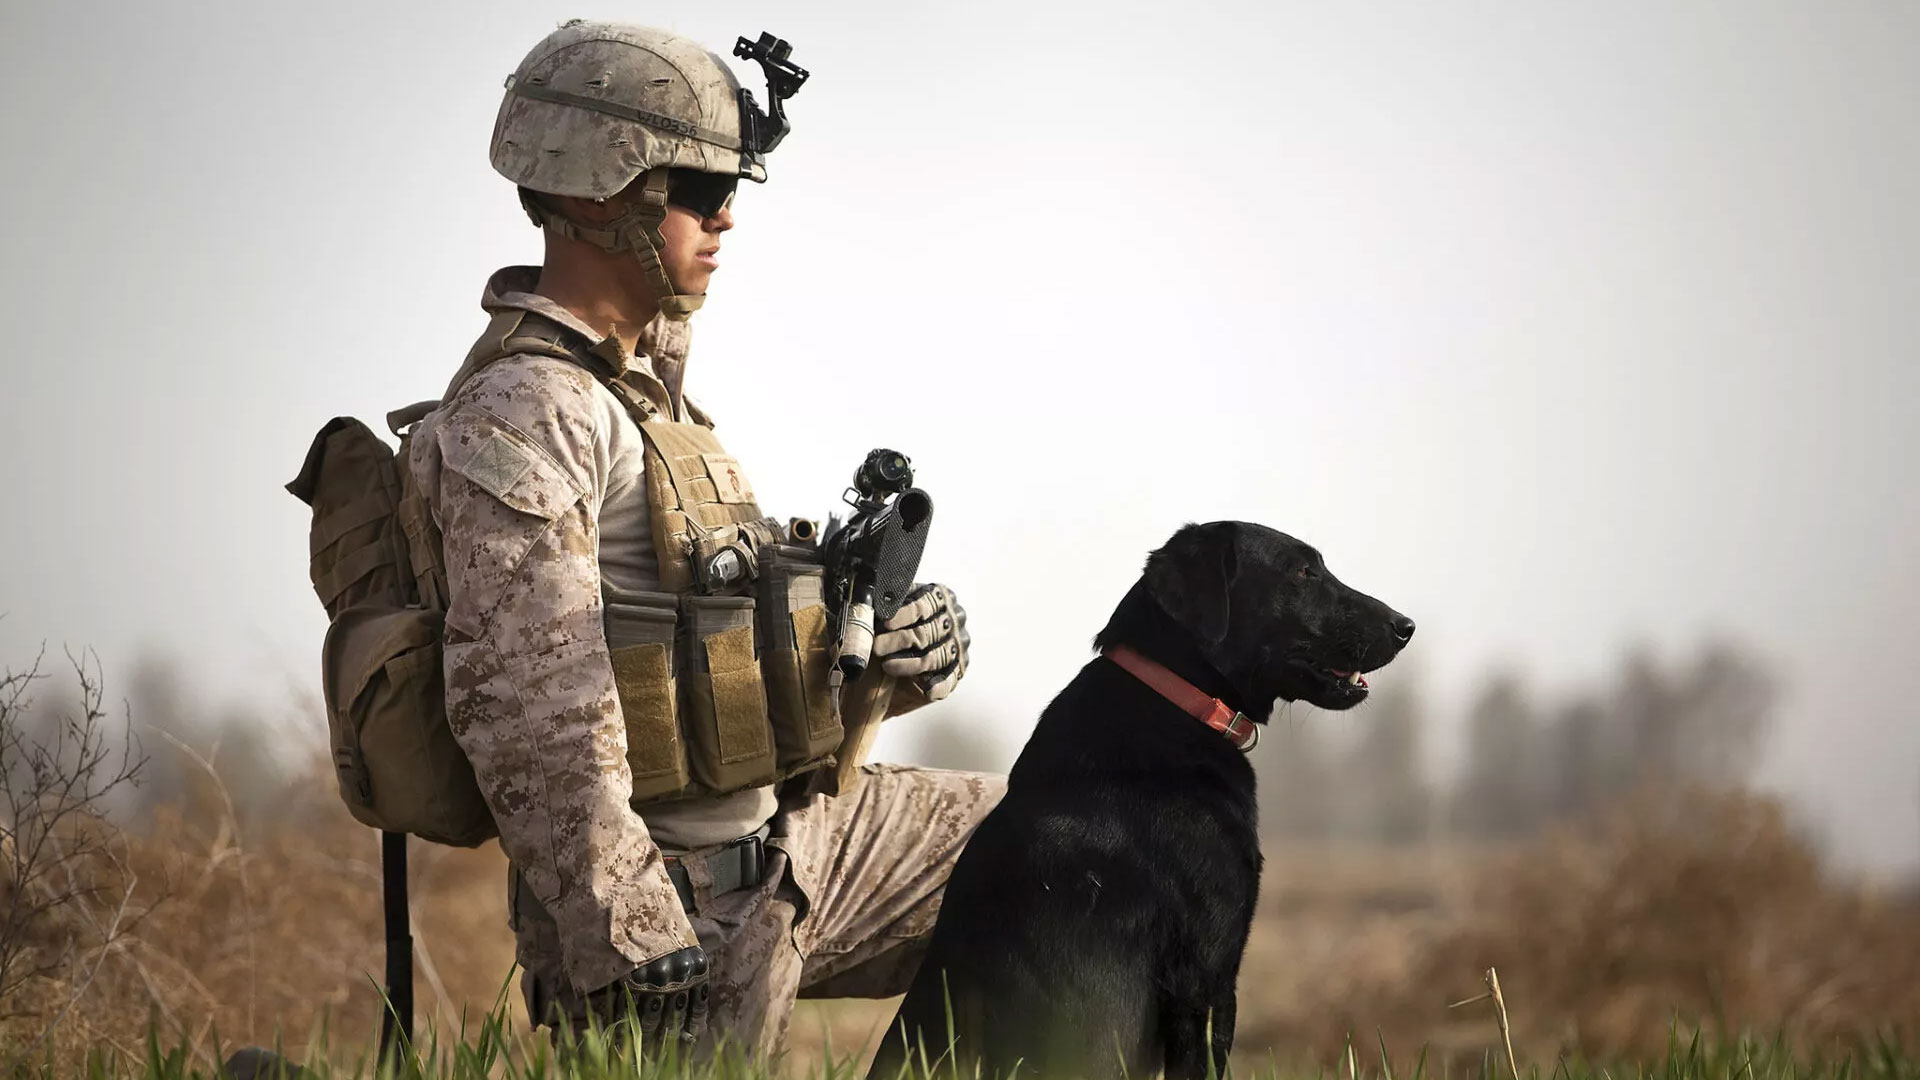 Two Heroic Dogs Honored for Their Service to US Troops...